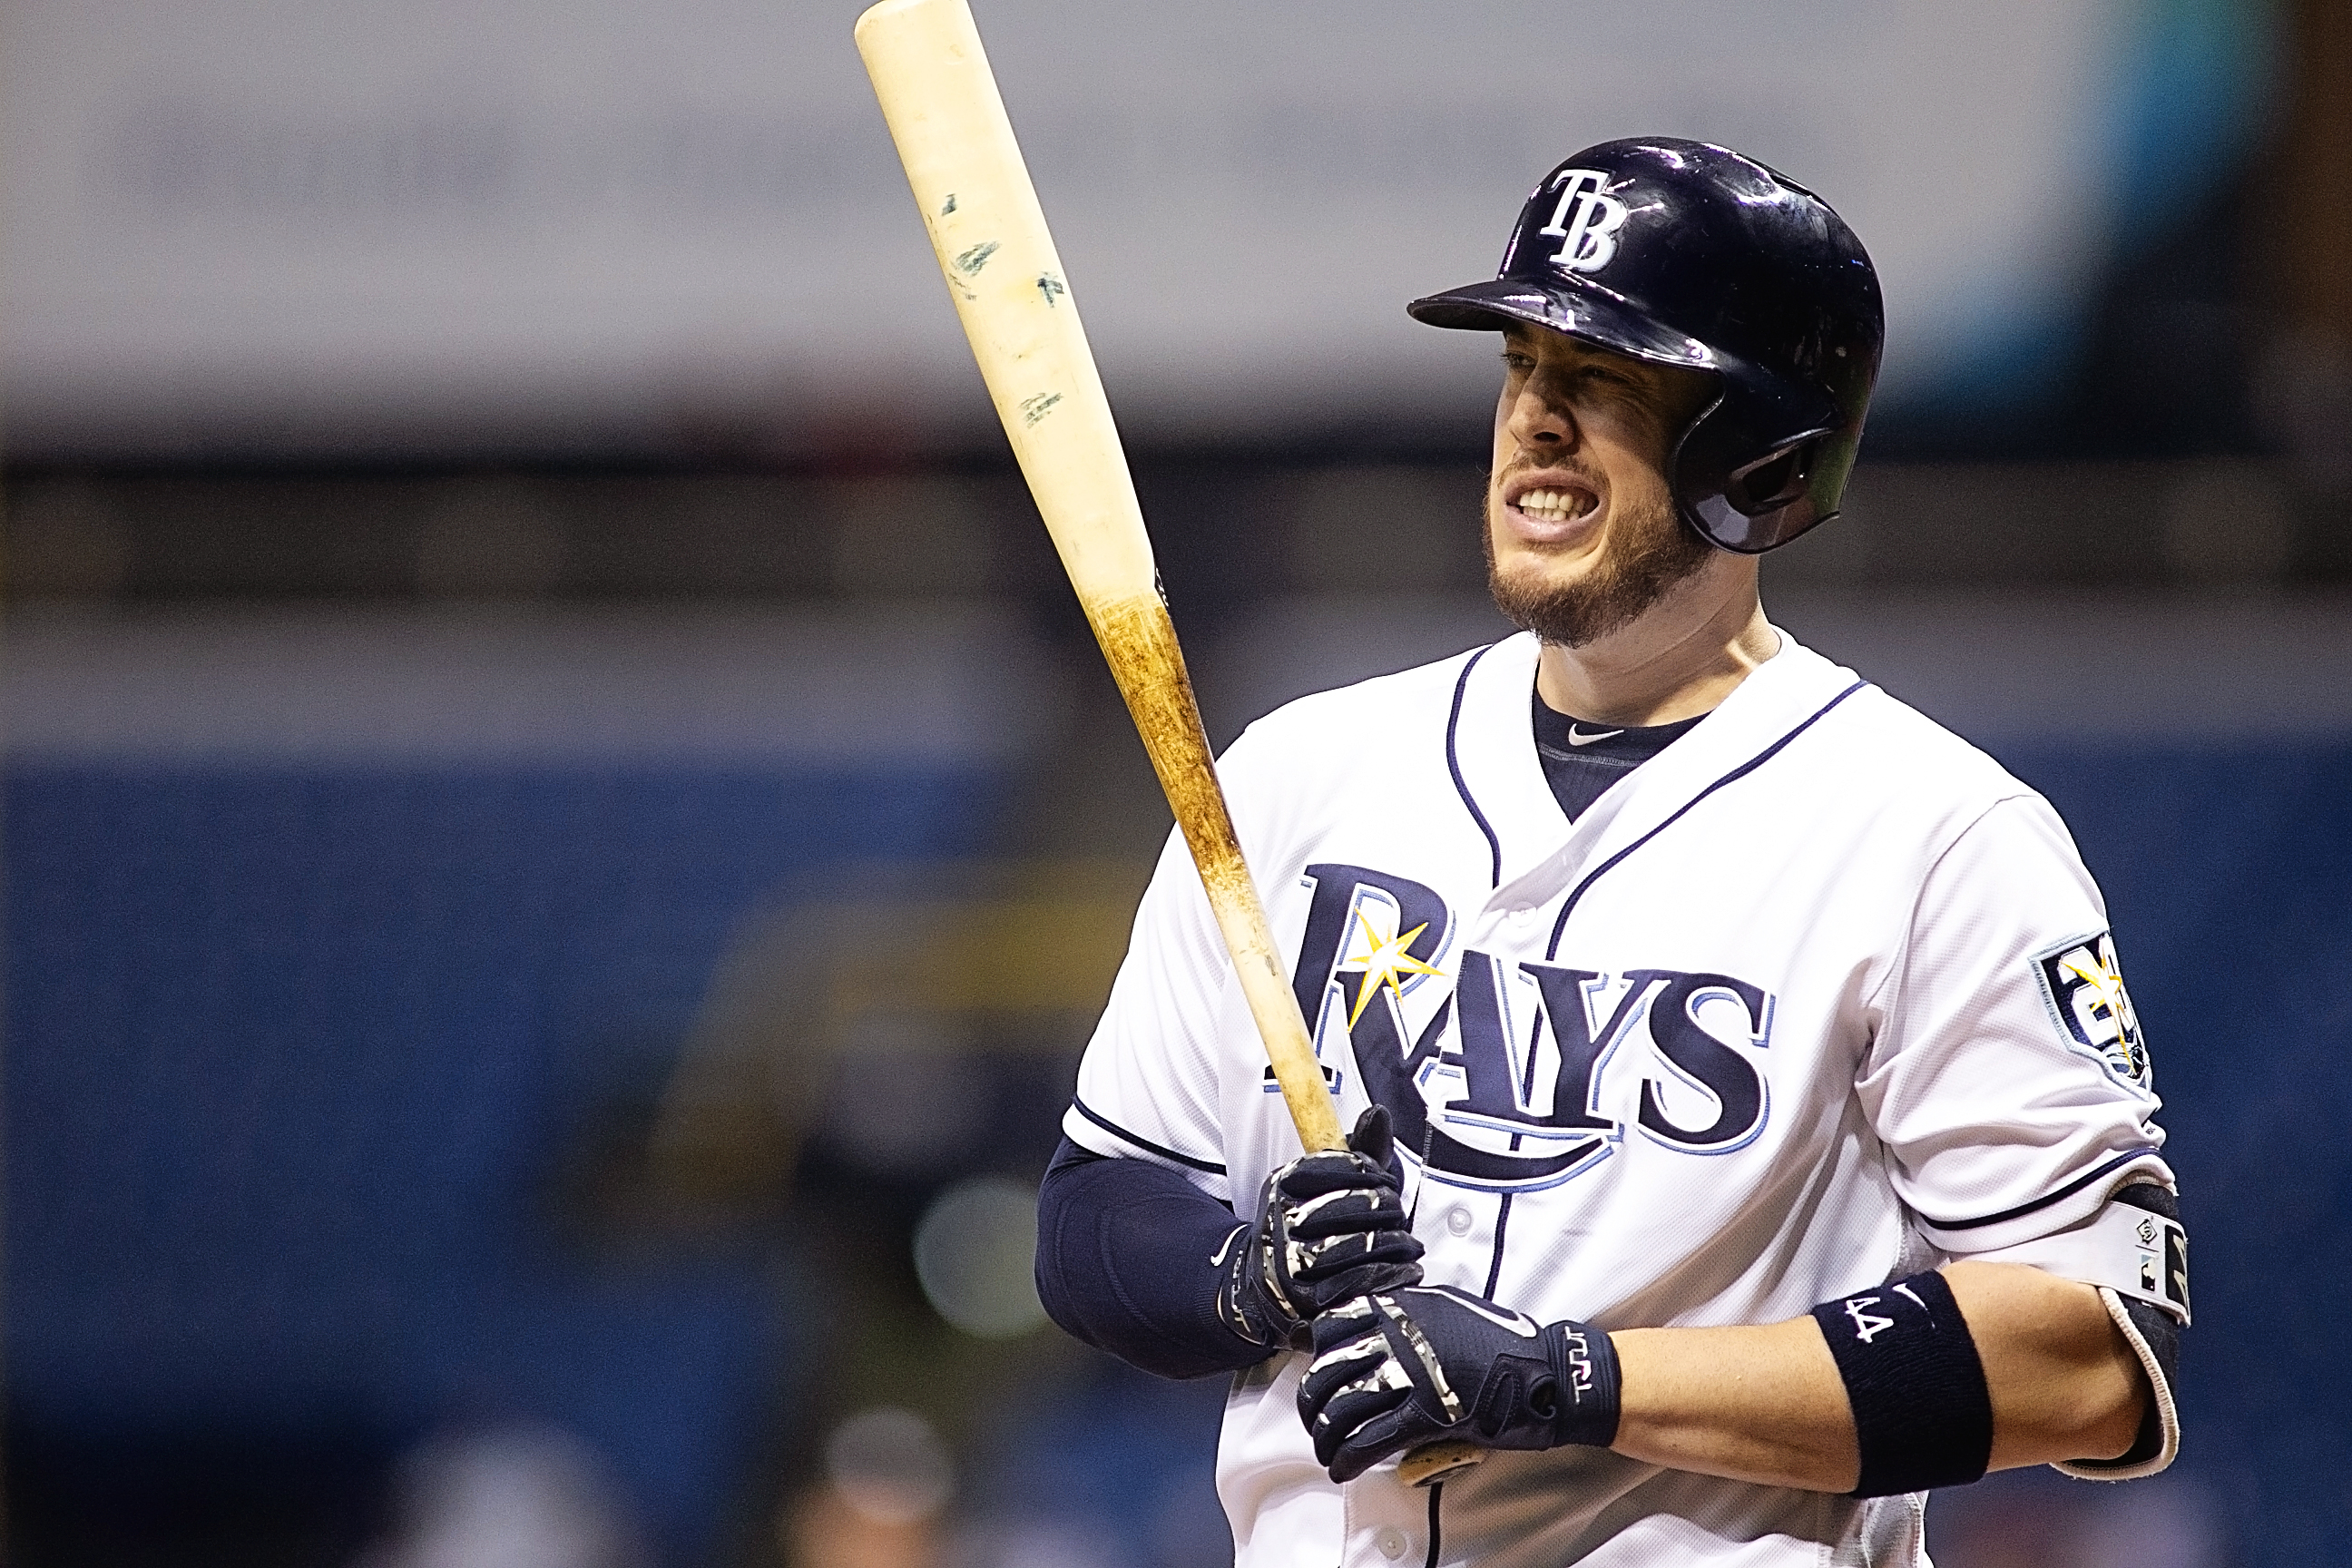 Cron hit two homers for the Rays./CARMEN MANDATO